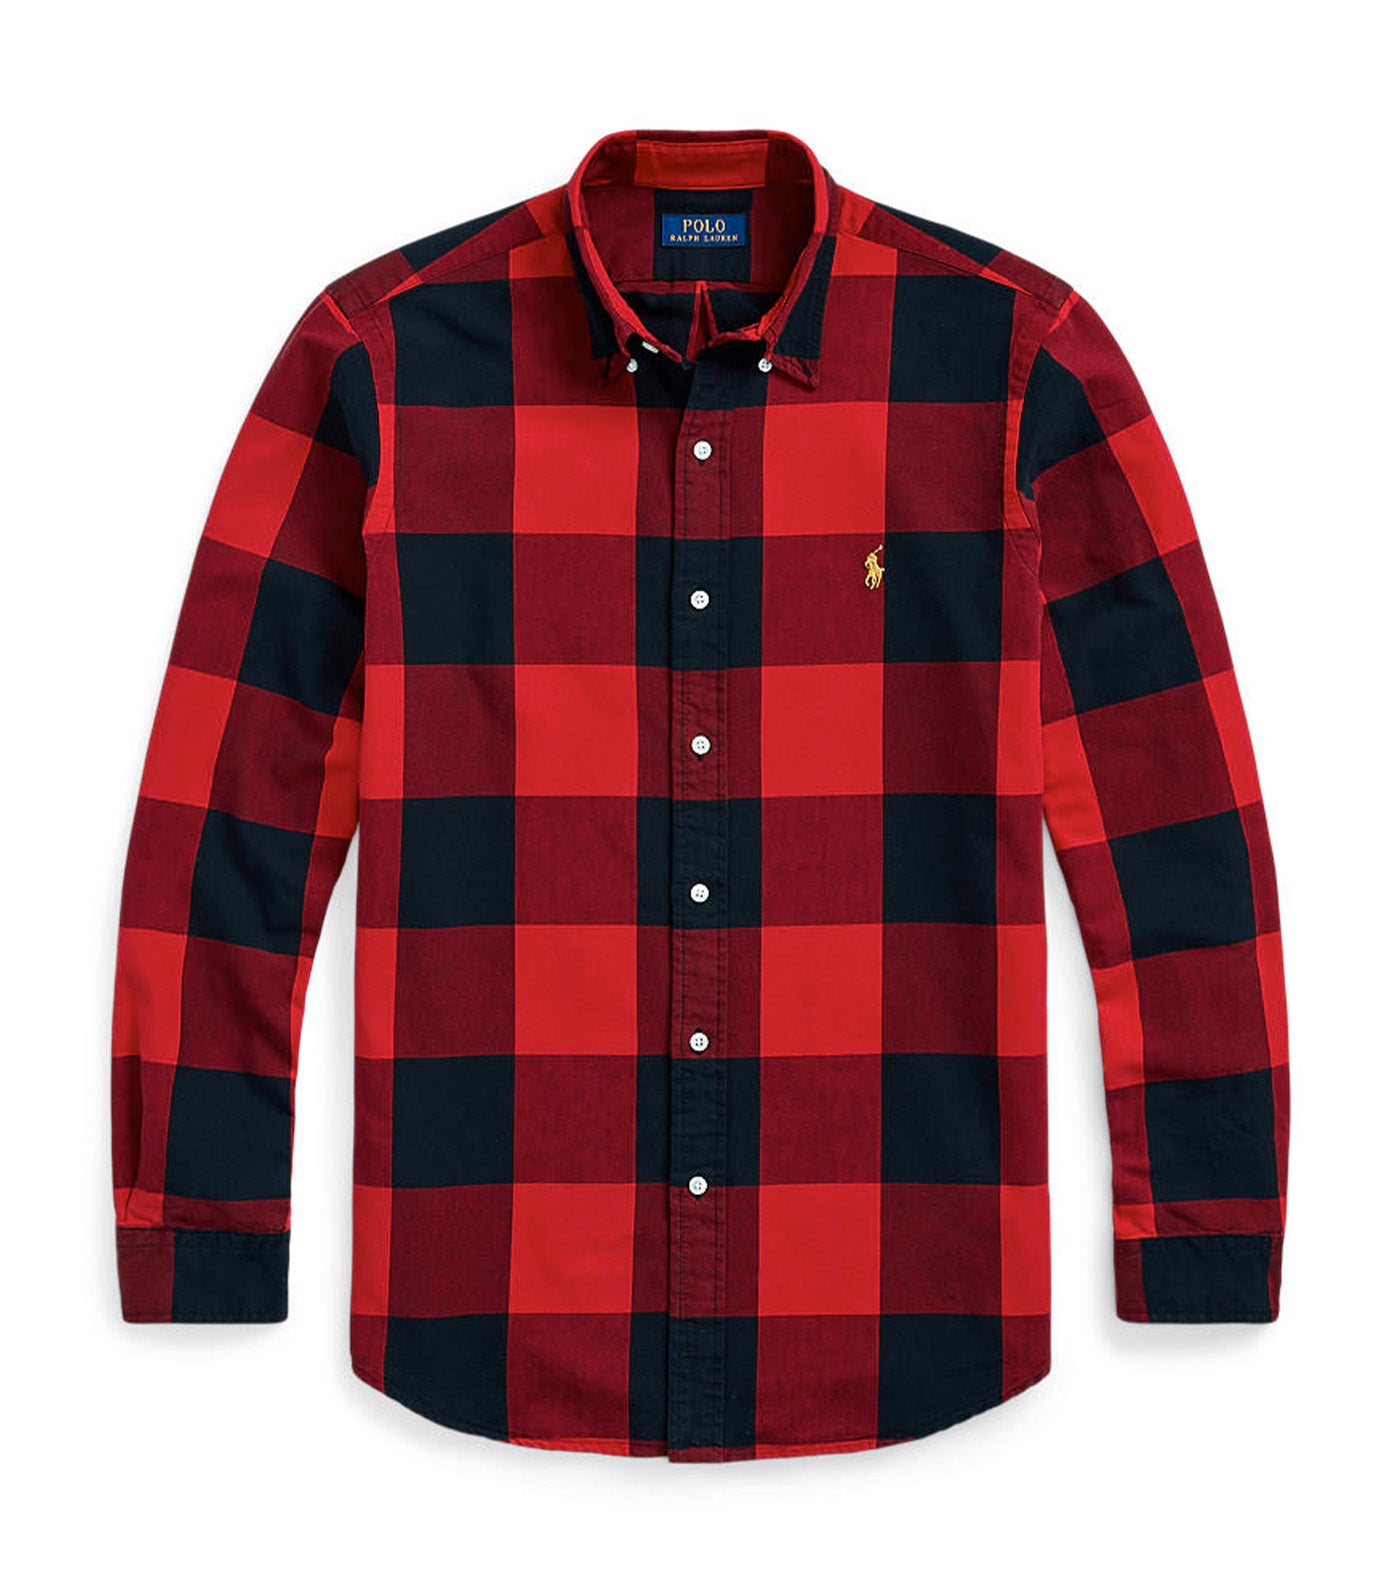 Men’s Classic Fit Oxford Shirt Red/Black